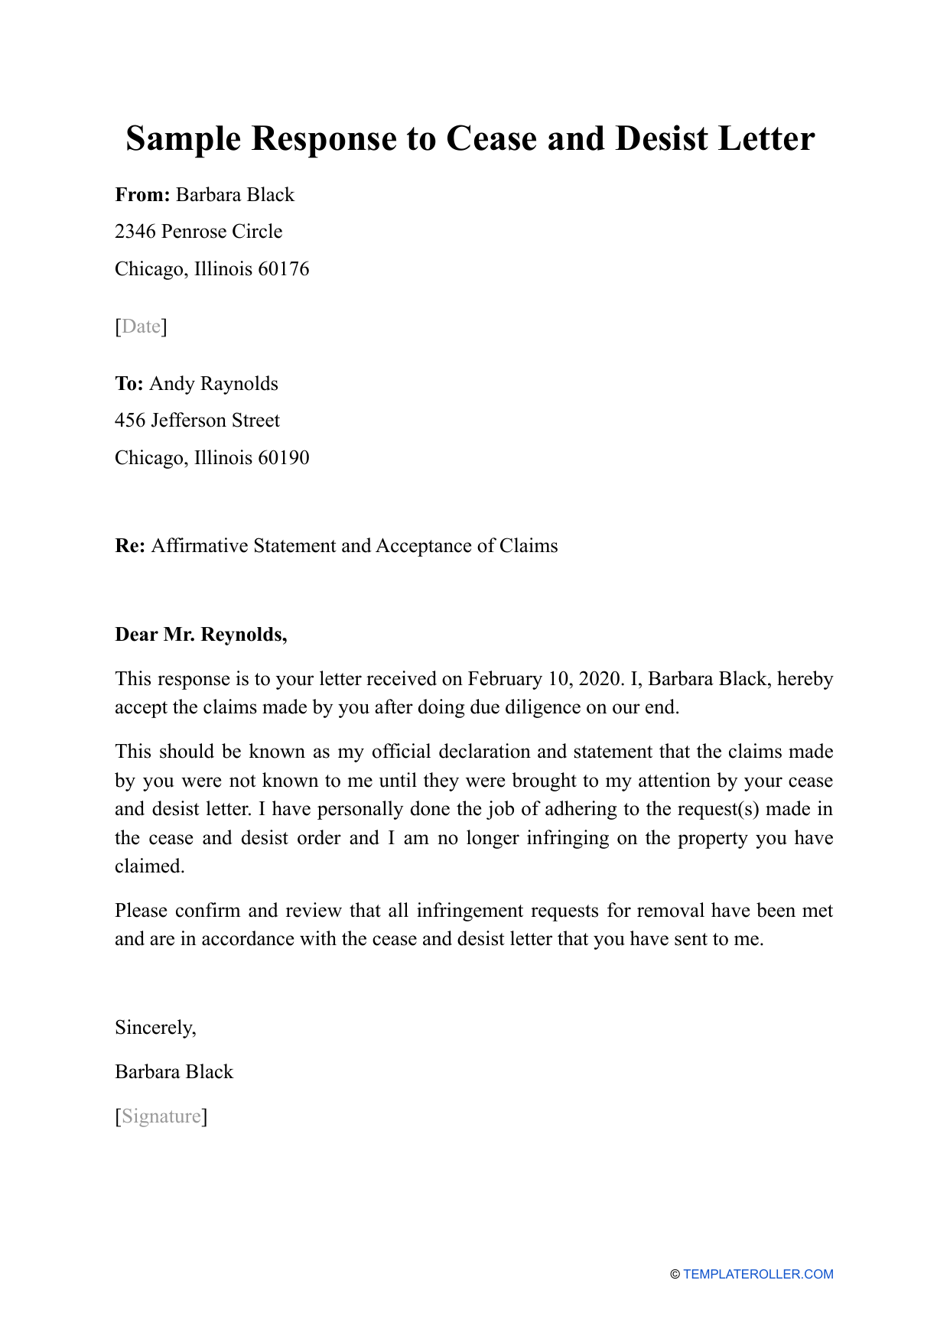 Sample Response to Cease and Desist Letter, Page 1